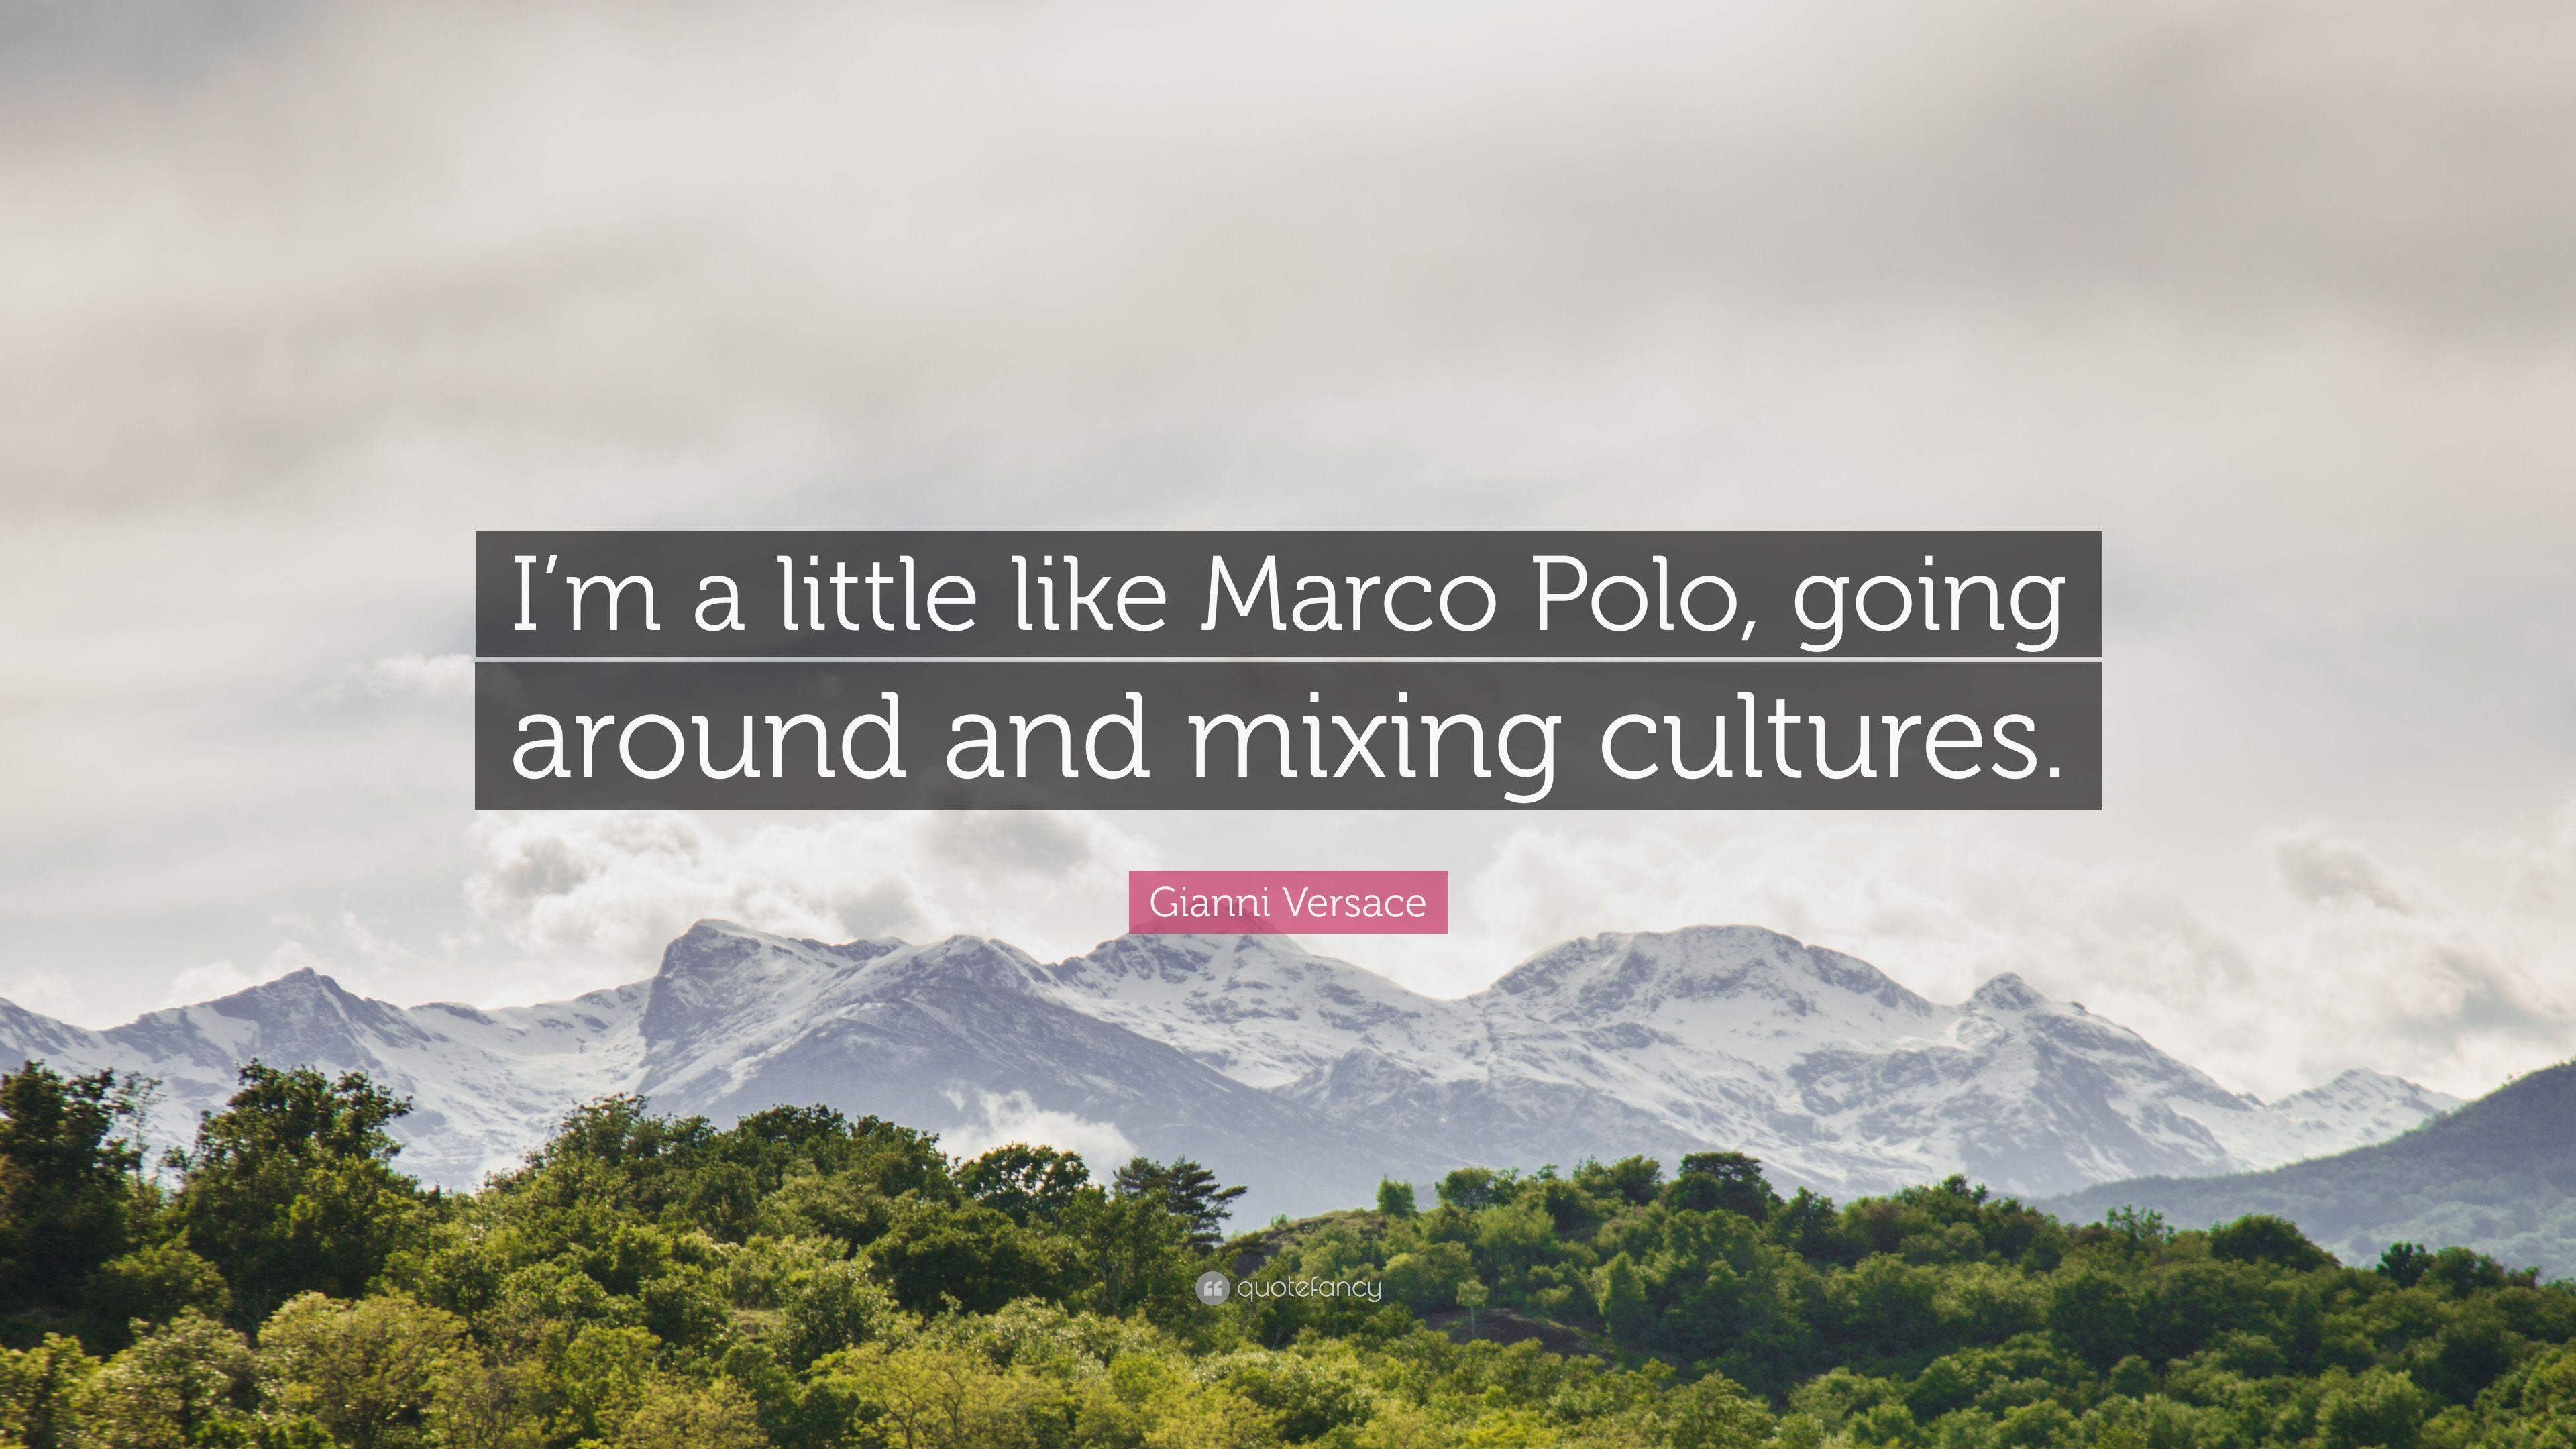 Gianni Versace Quote: “I'm a little like Marco Polo, going around